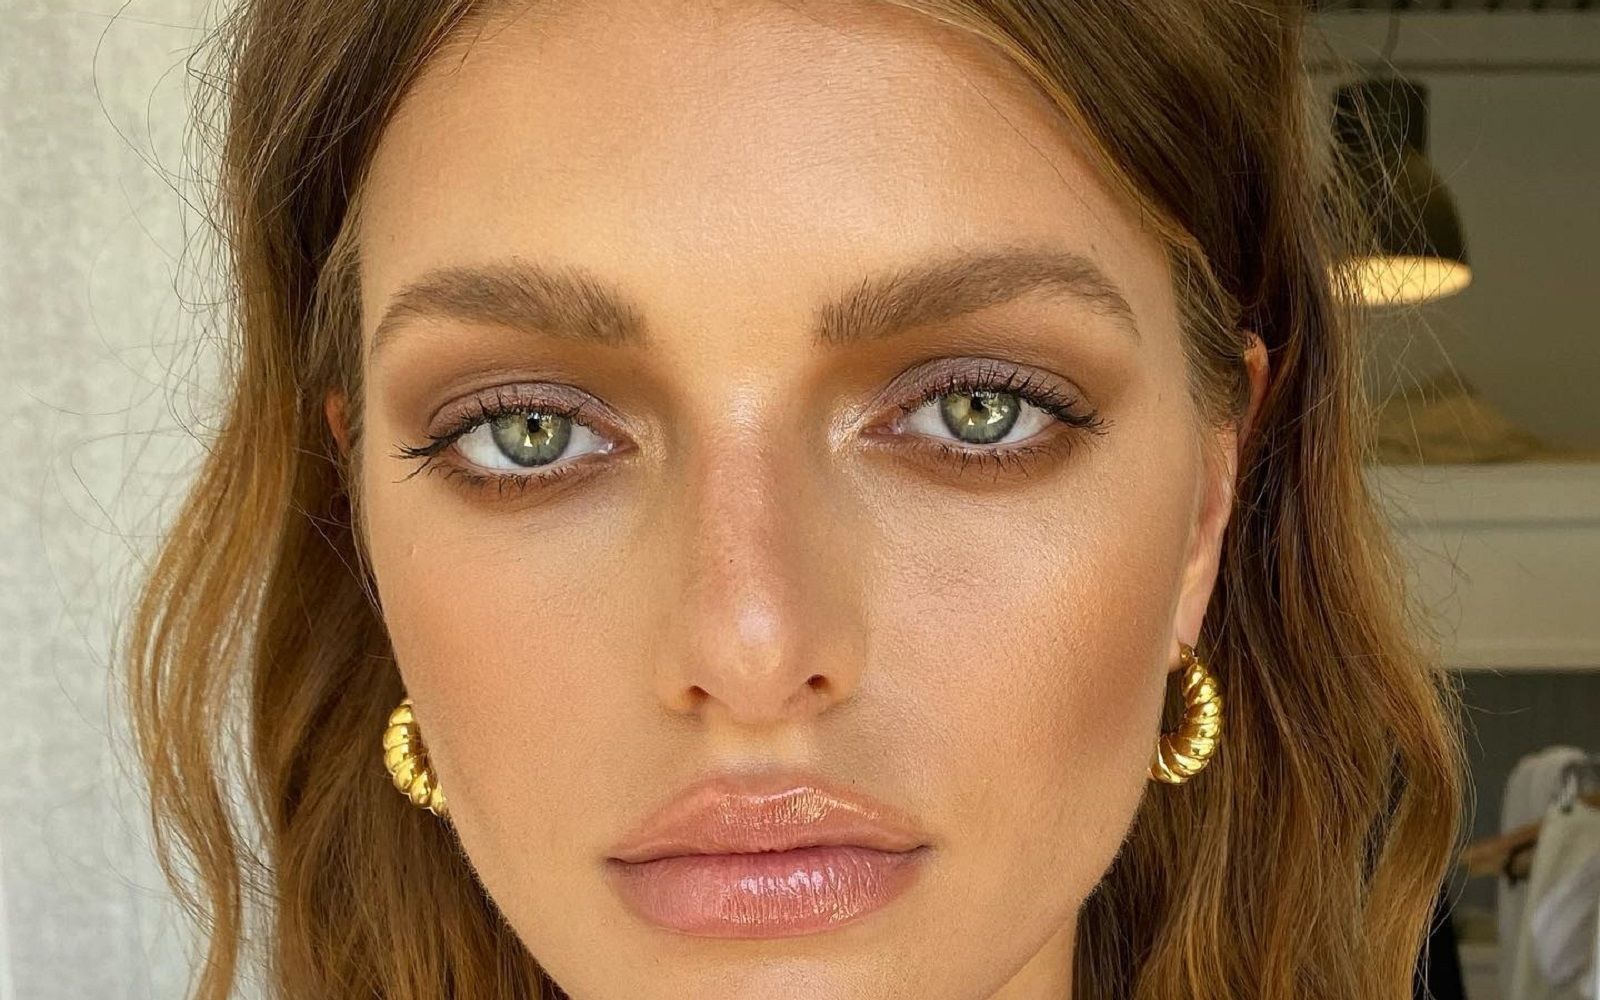 What is the Latte Makeup trend?